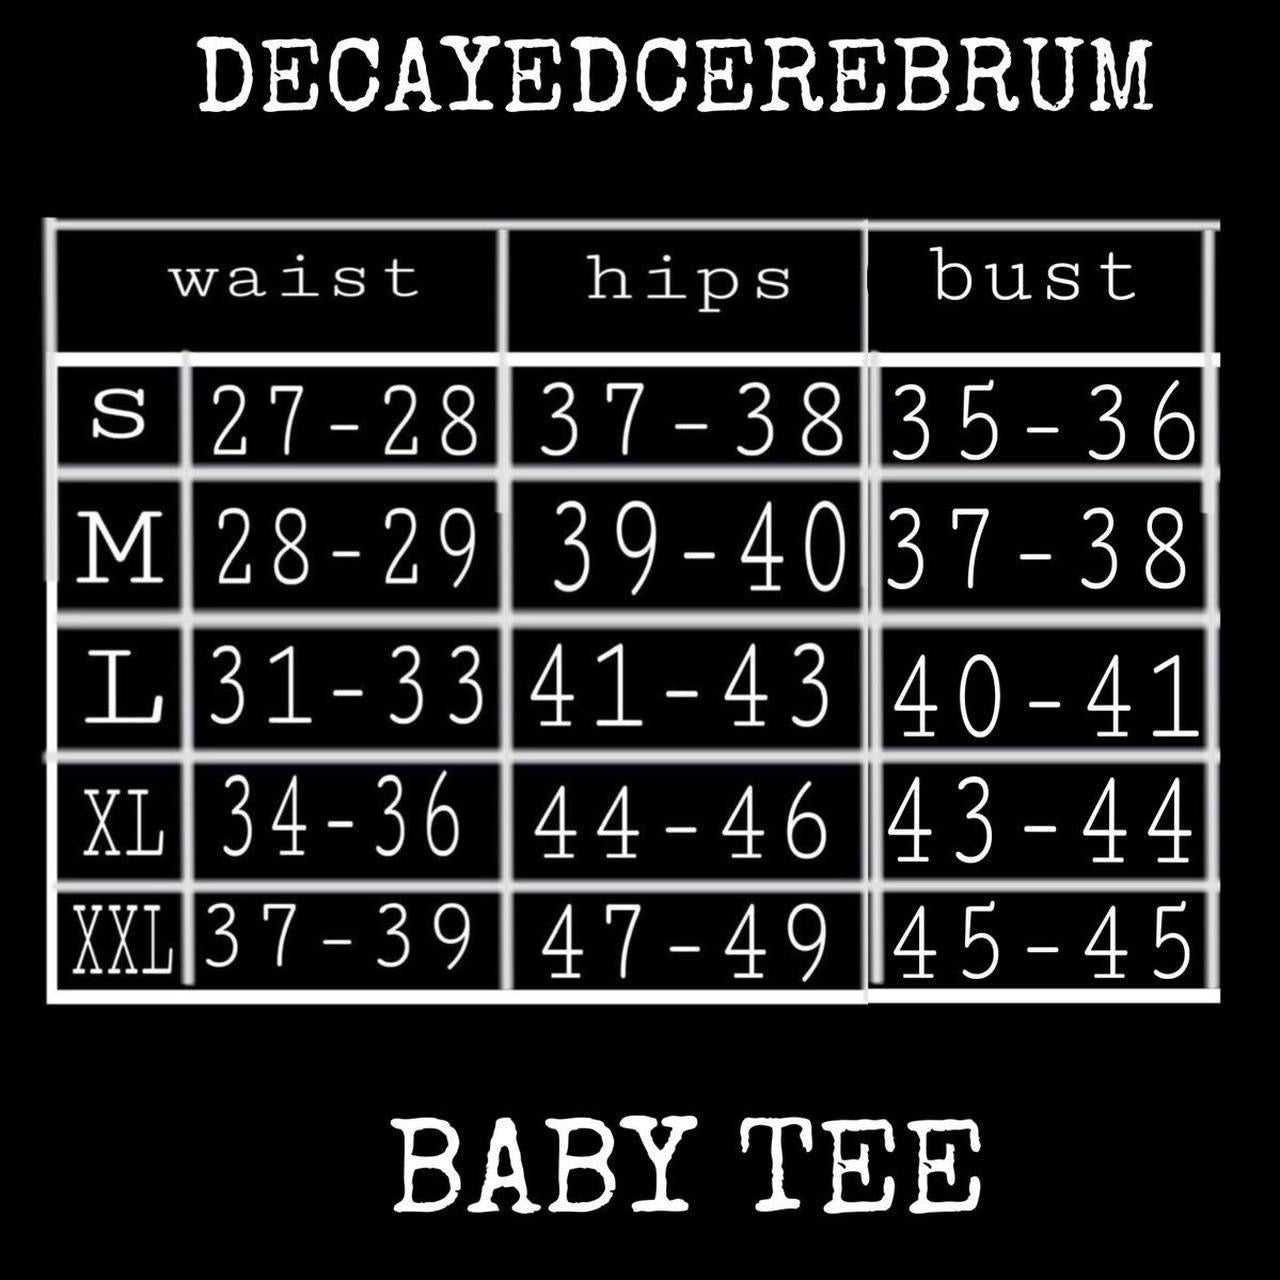 Eyes cropped baby tee